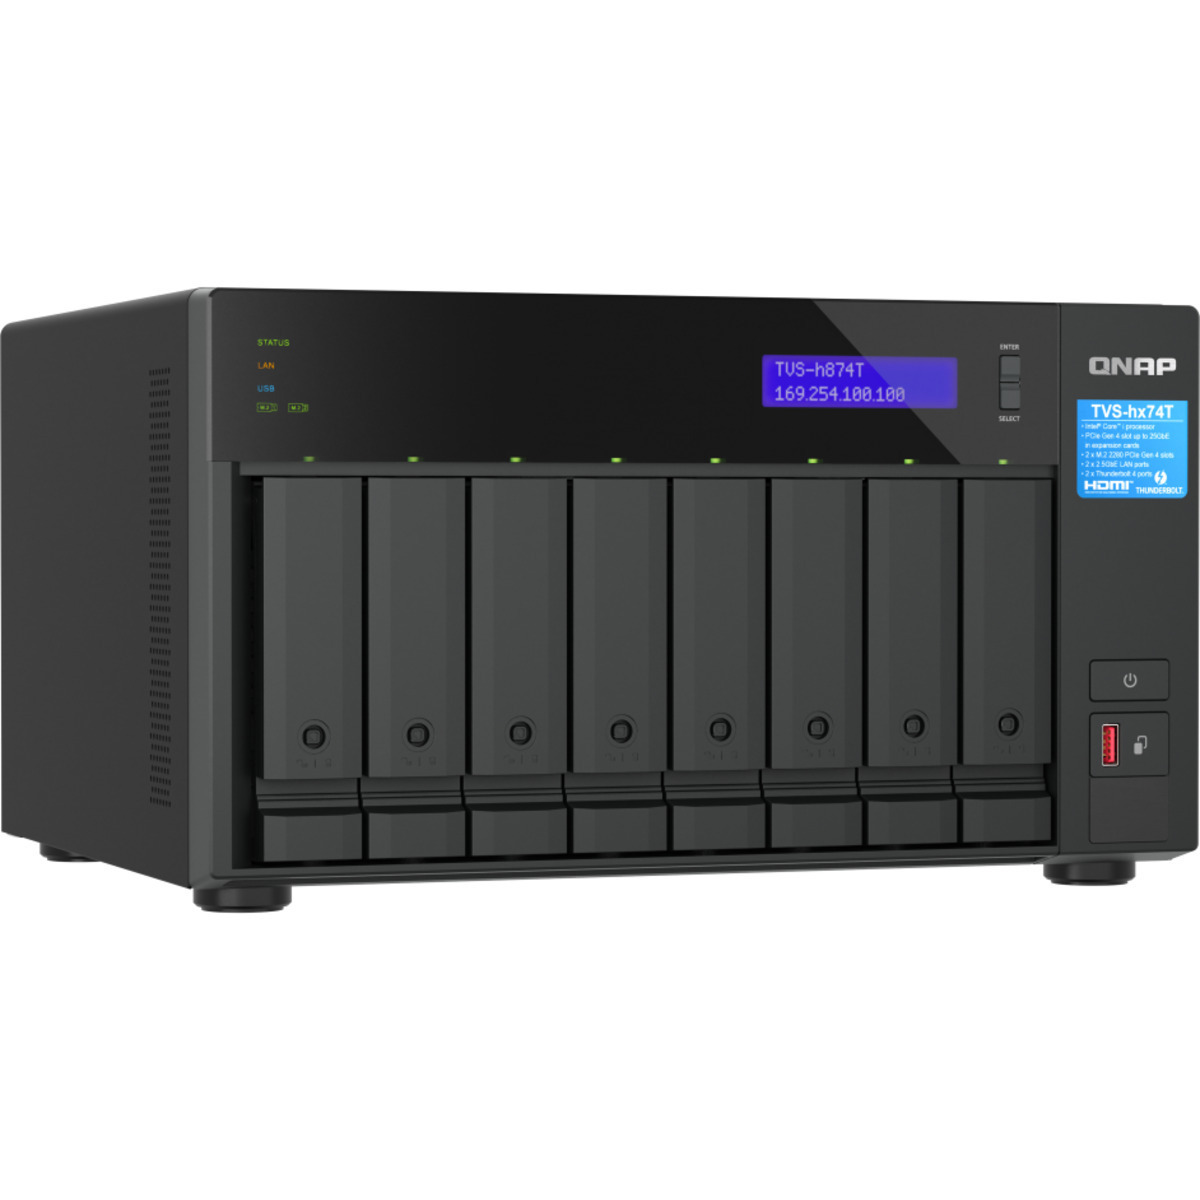 buy QNAP TVS-h874T Core i9 Thunderbolt 4 176tb Desktop DAS-NAS - Combo Direct + Network Storage Device 8x22000gb Western Digital Ultrastar HC570 WUH722222ALE6L4 3.5 7200rpm SATA 6Gb/s HDD ENTERPRISE Class Drives Installed - Burn-In Tested - nas headquarters buy network attached storage server device das new raid-5 free shipping usa spring sale TVS-h874T Core i9 Thunderbolt 4